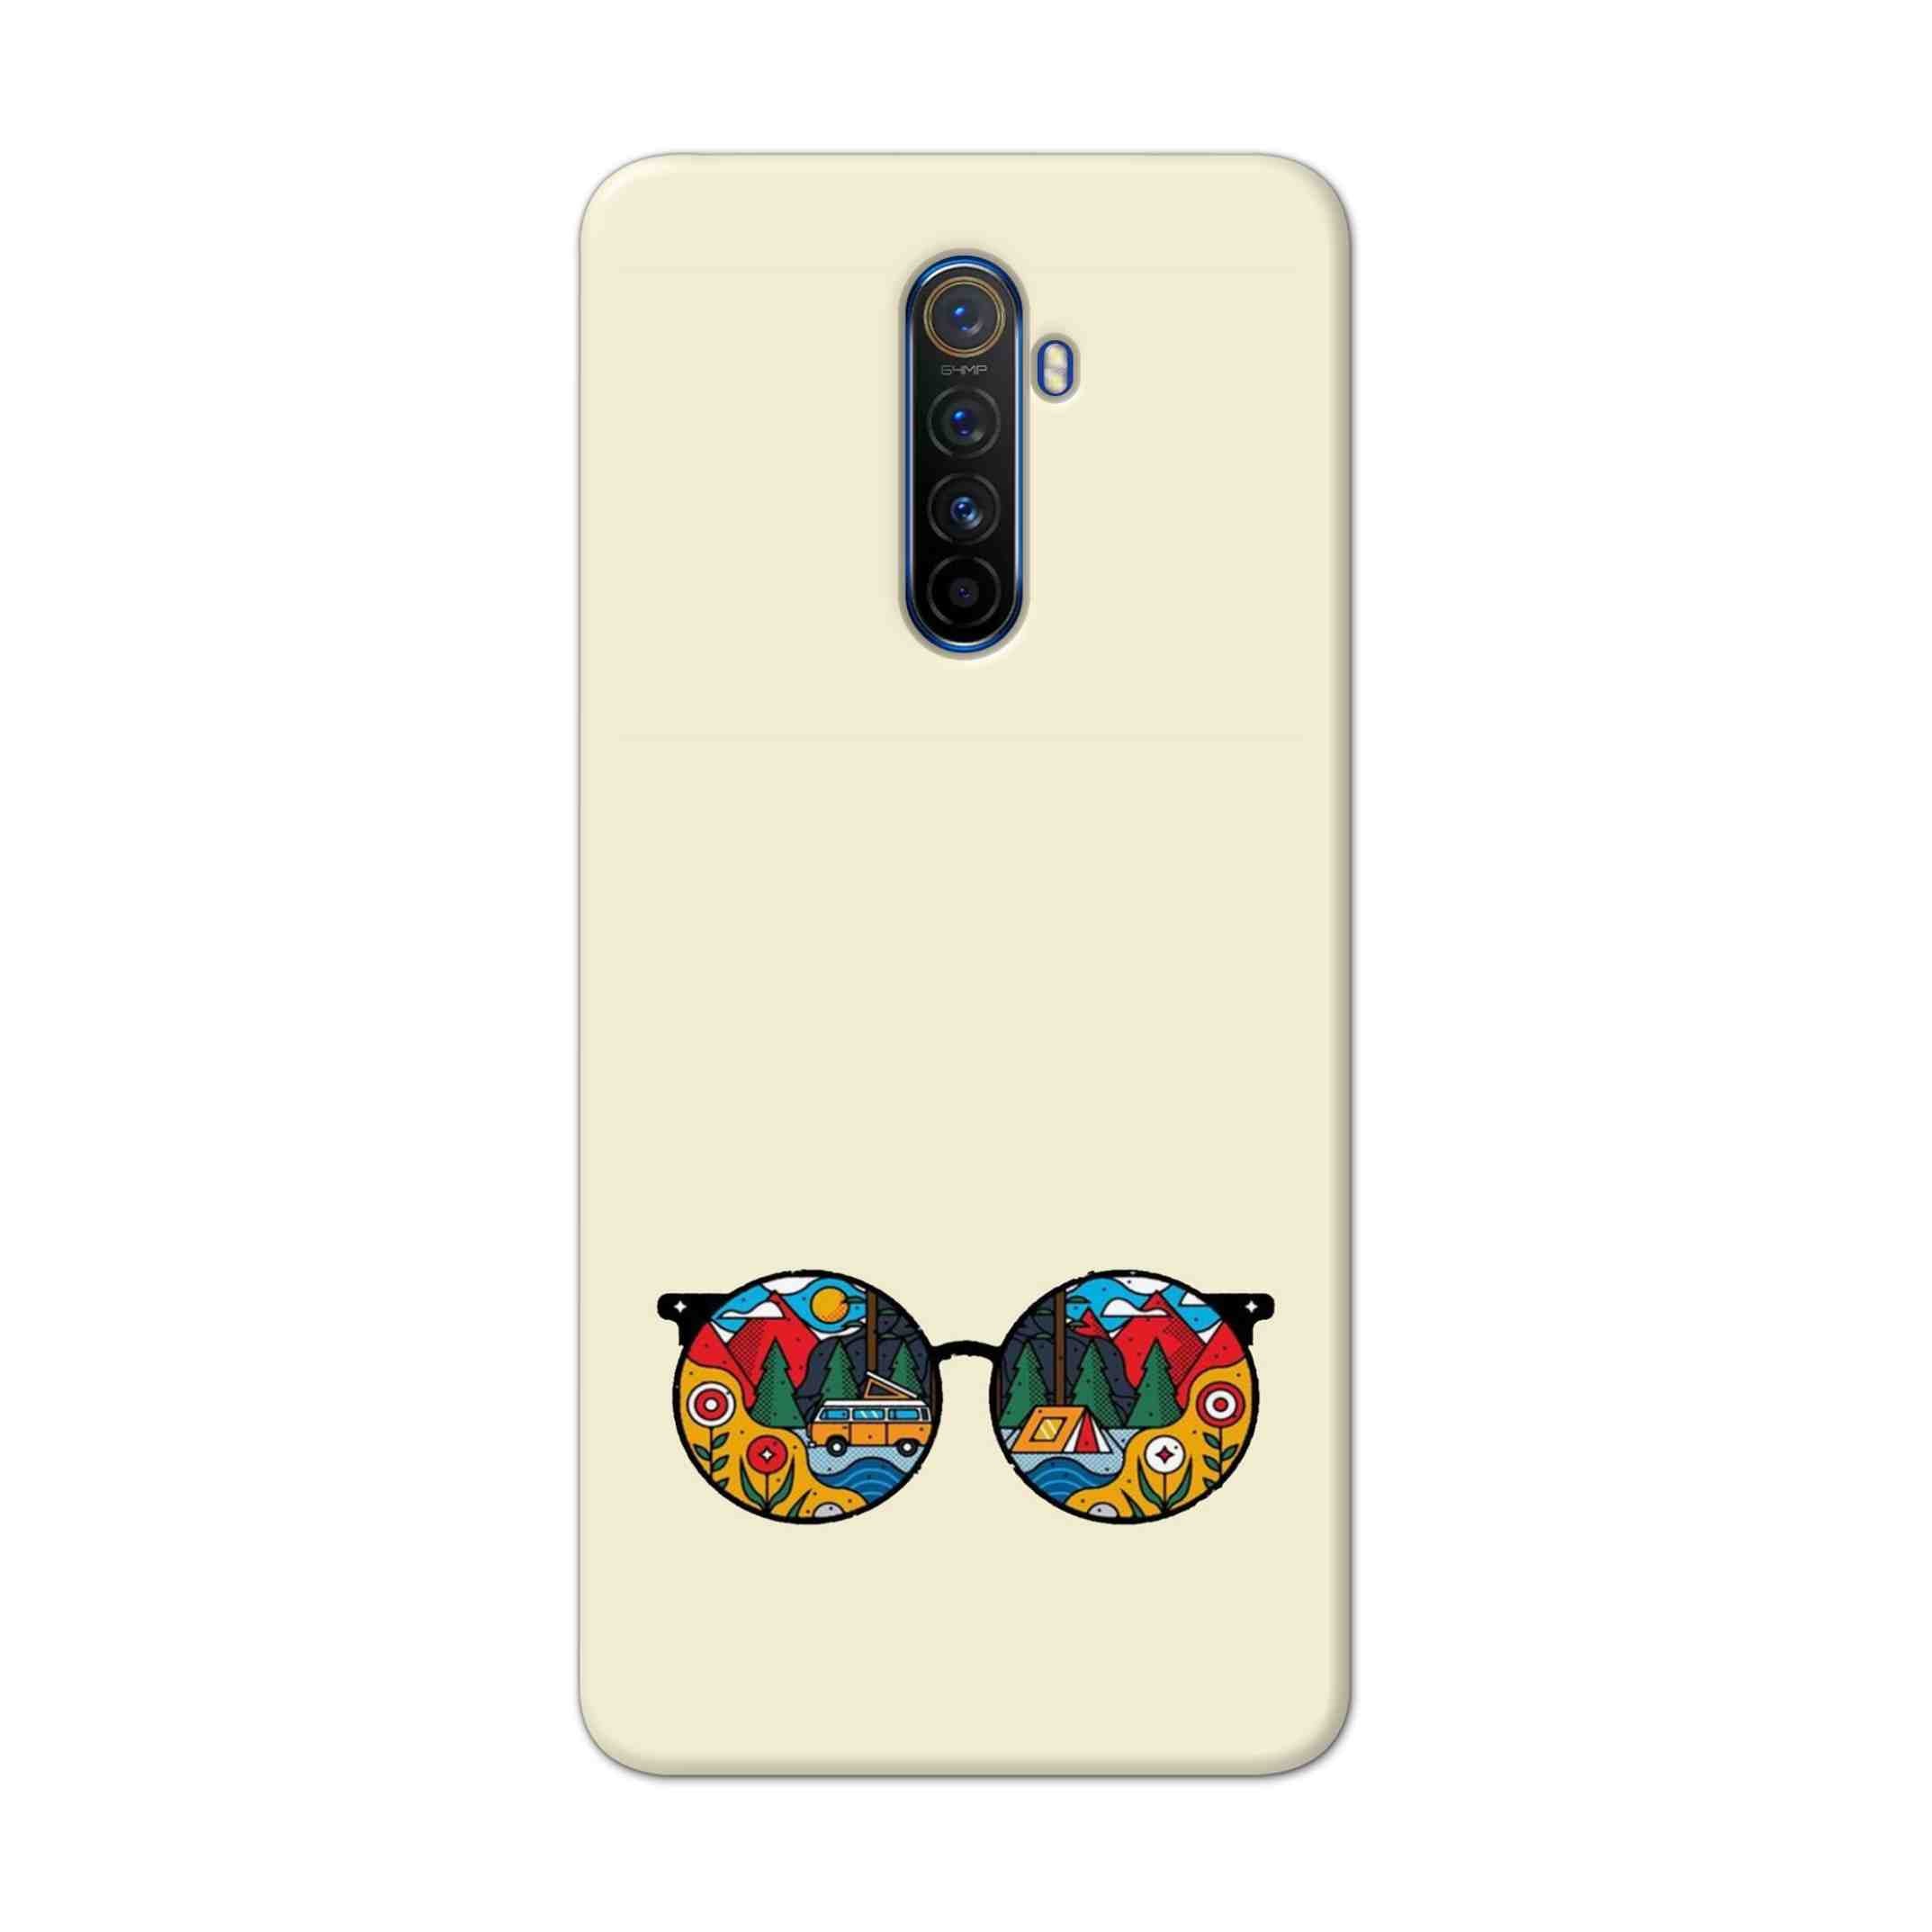 Buy Rainbow Sunglasses Hard Back Mobile Phone Case Cover For Realme X2 Pro Online